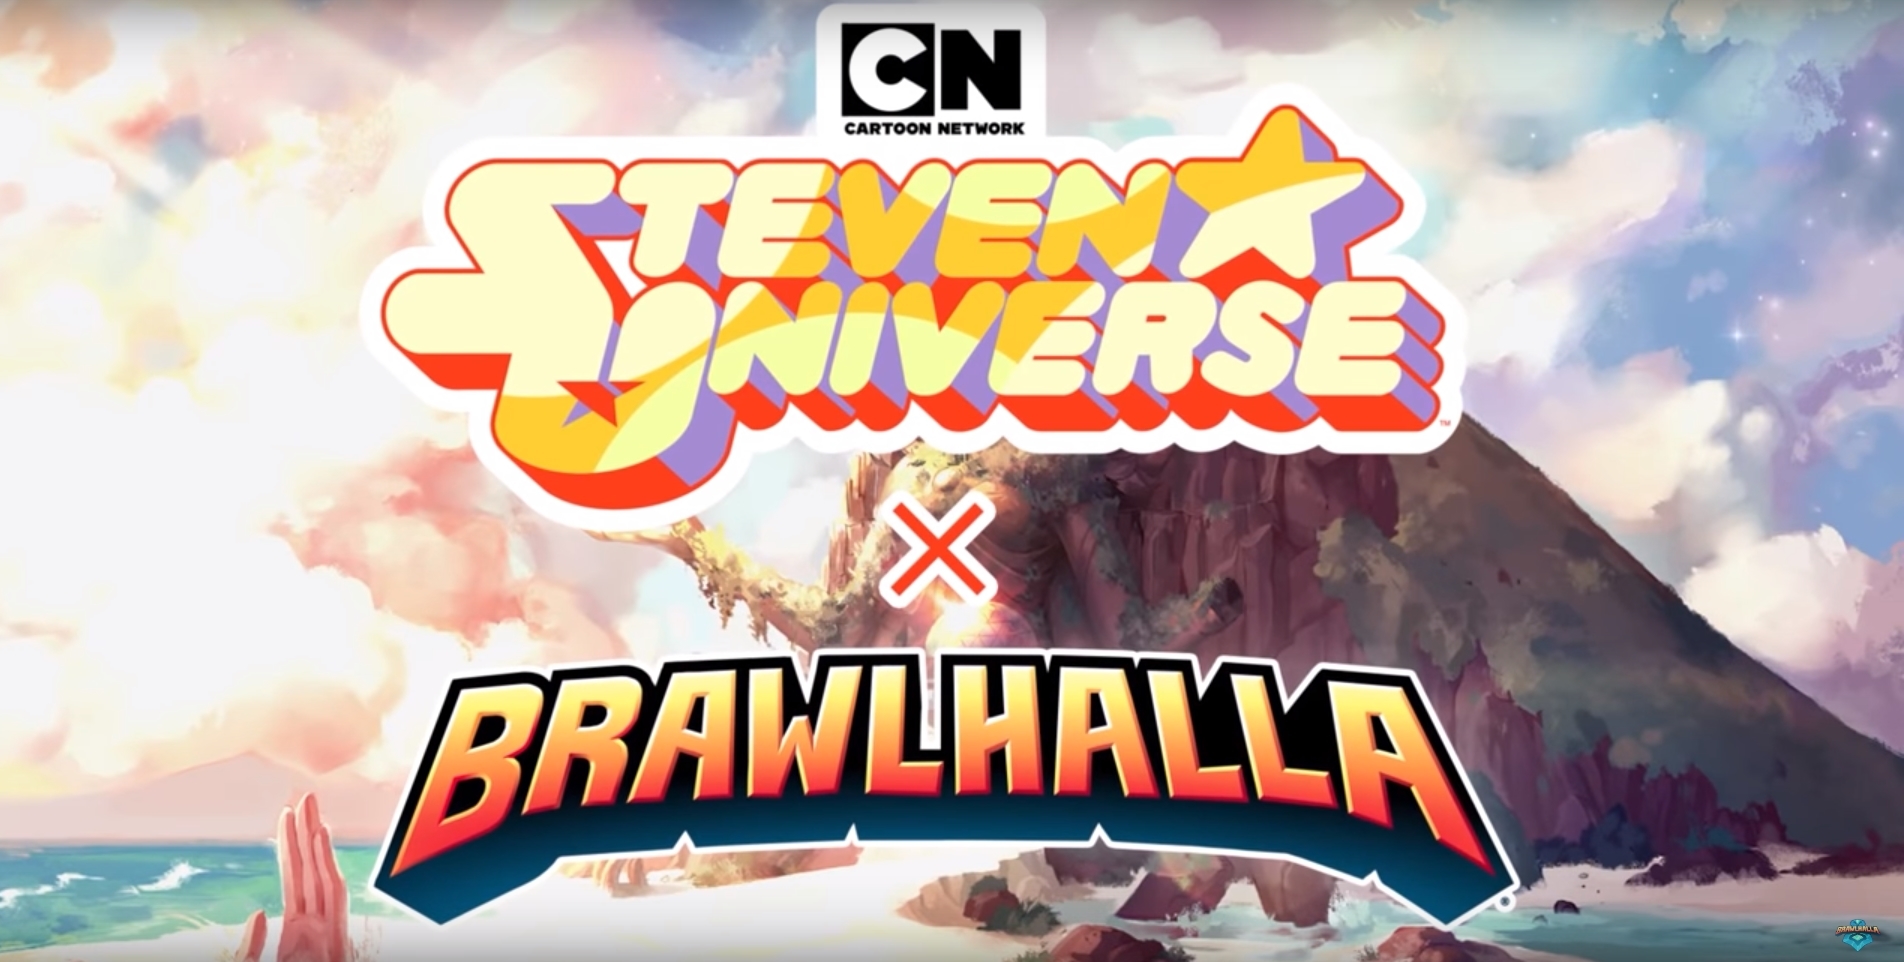 Brawlhalla Adds the Crystal Gems of Steven Universe, Including Garnet, Amethyst, Pearl, and Stevonnie